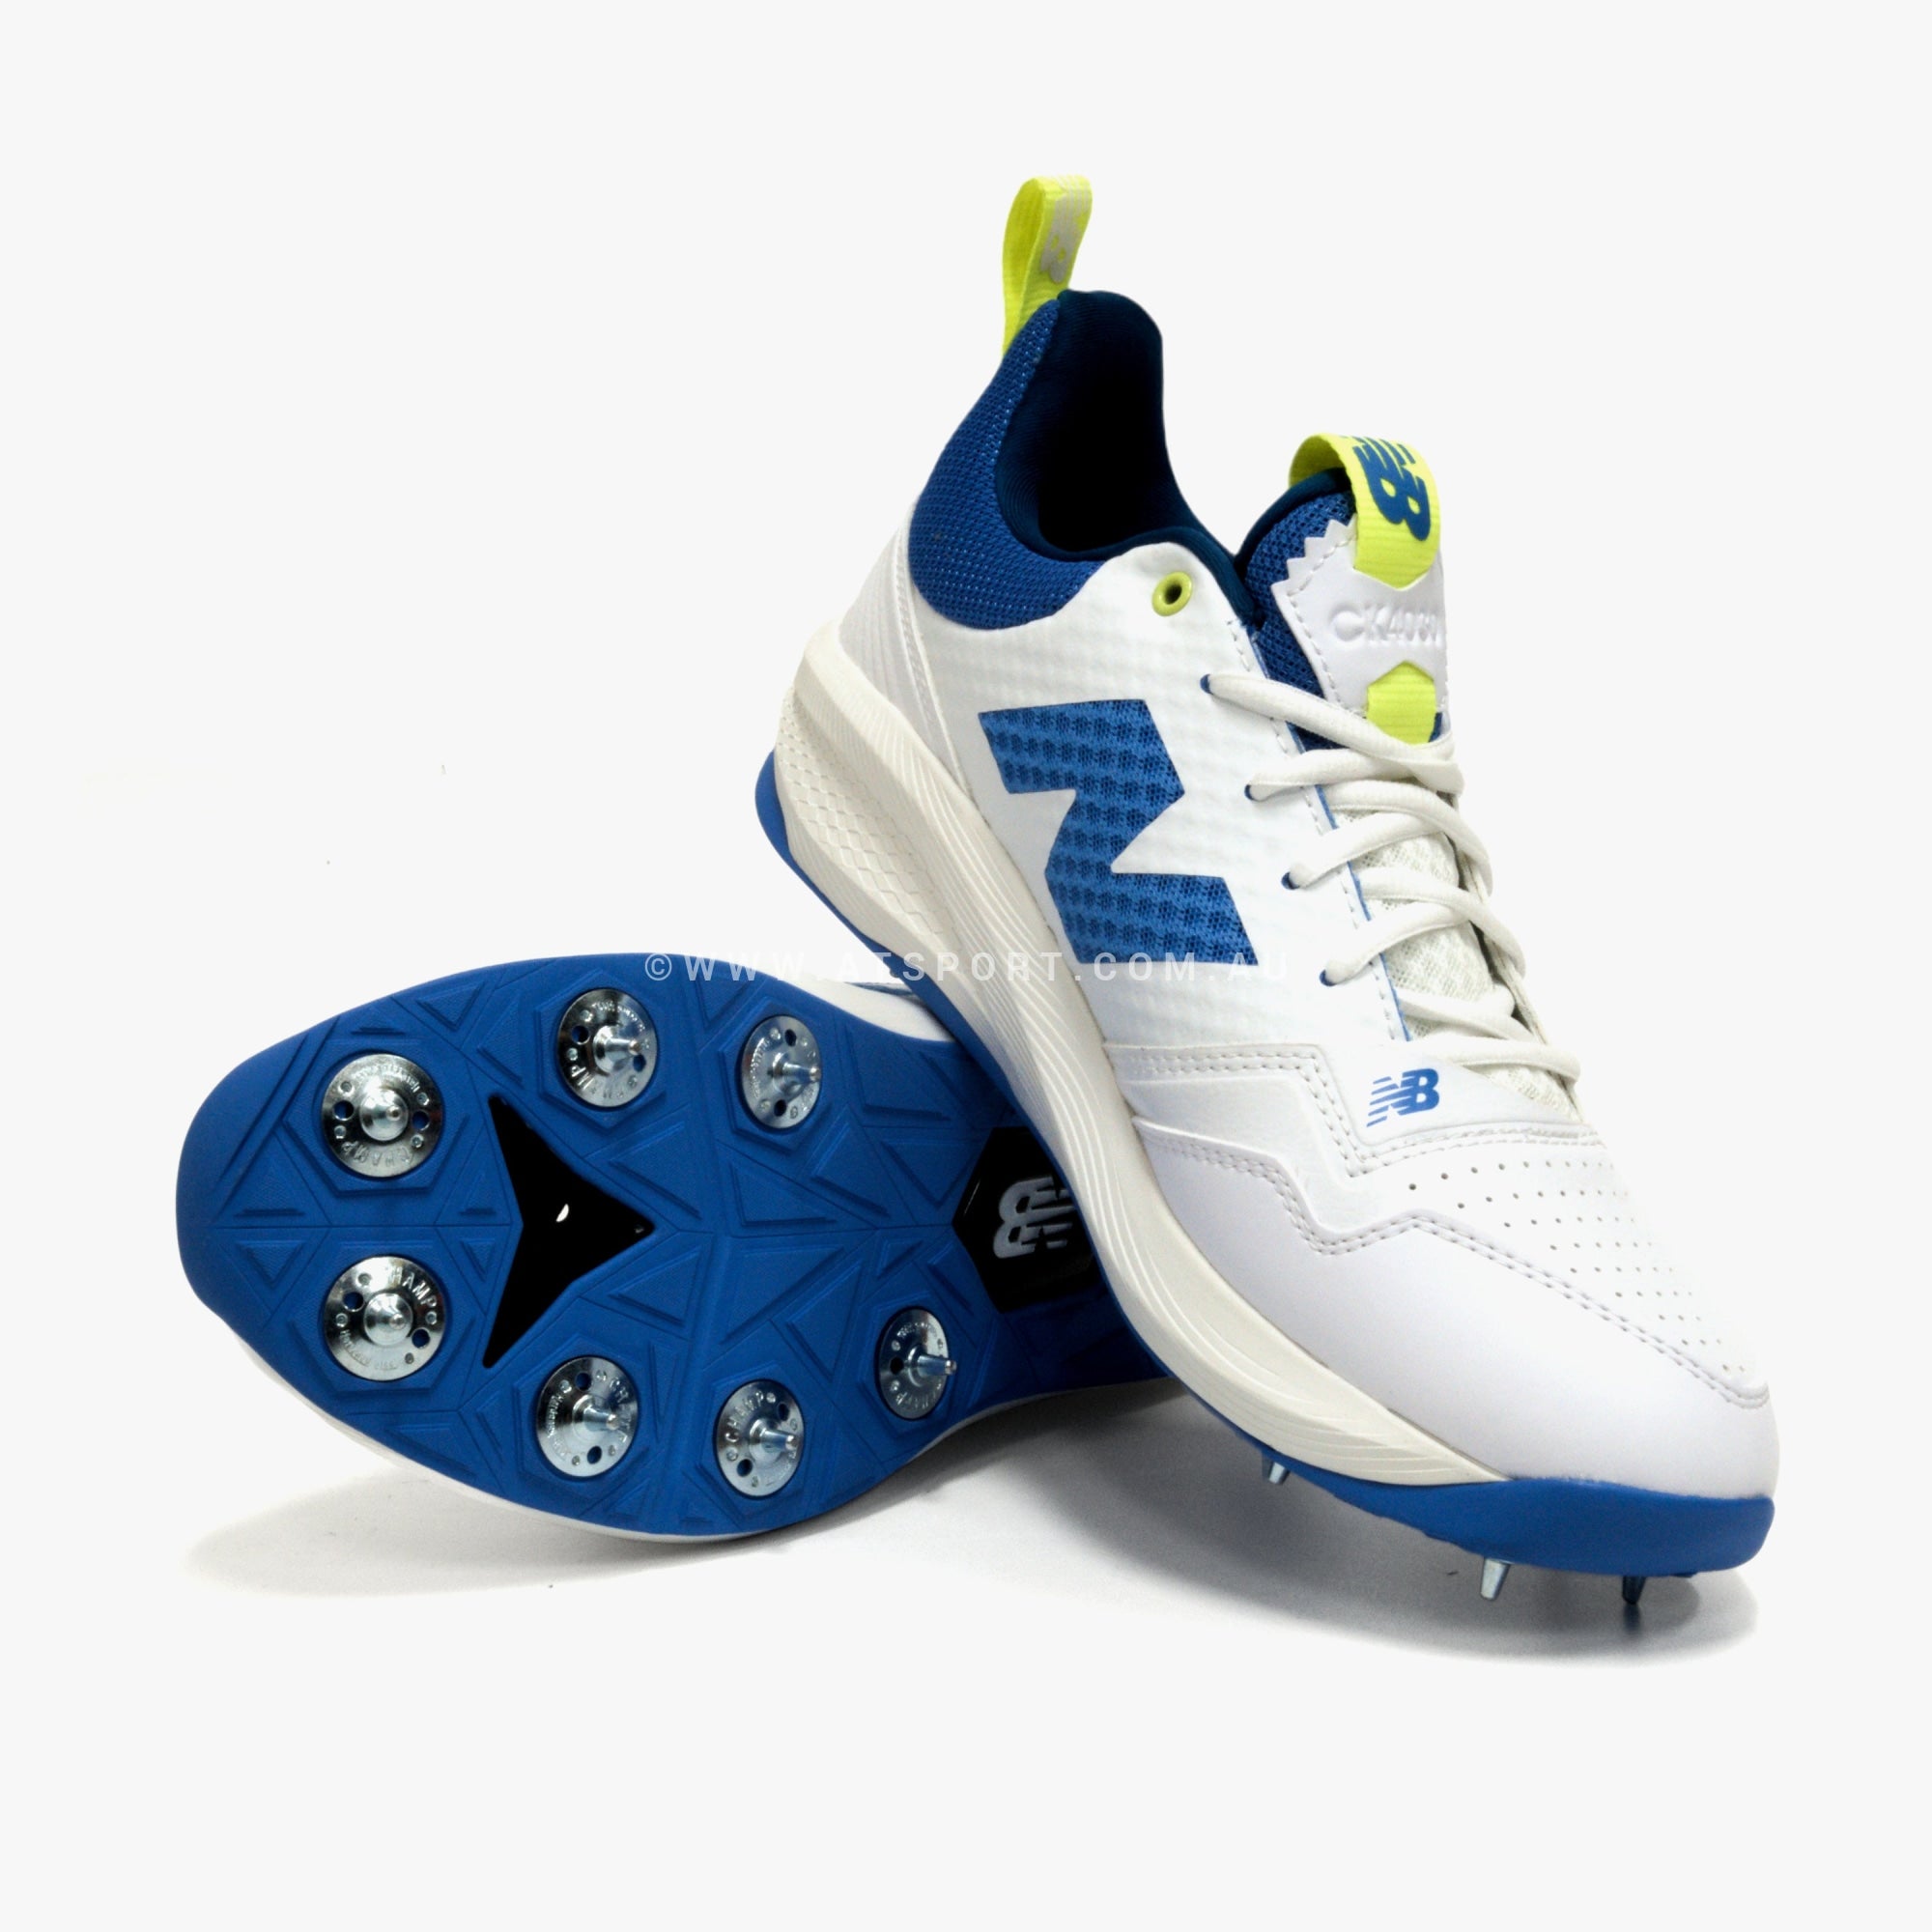 New Balance Ck4030 V5 Spike Cricket Shoes / Spikes All-Rounder